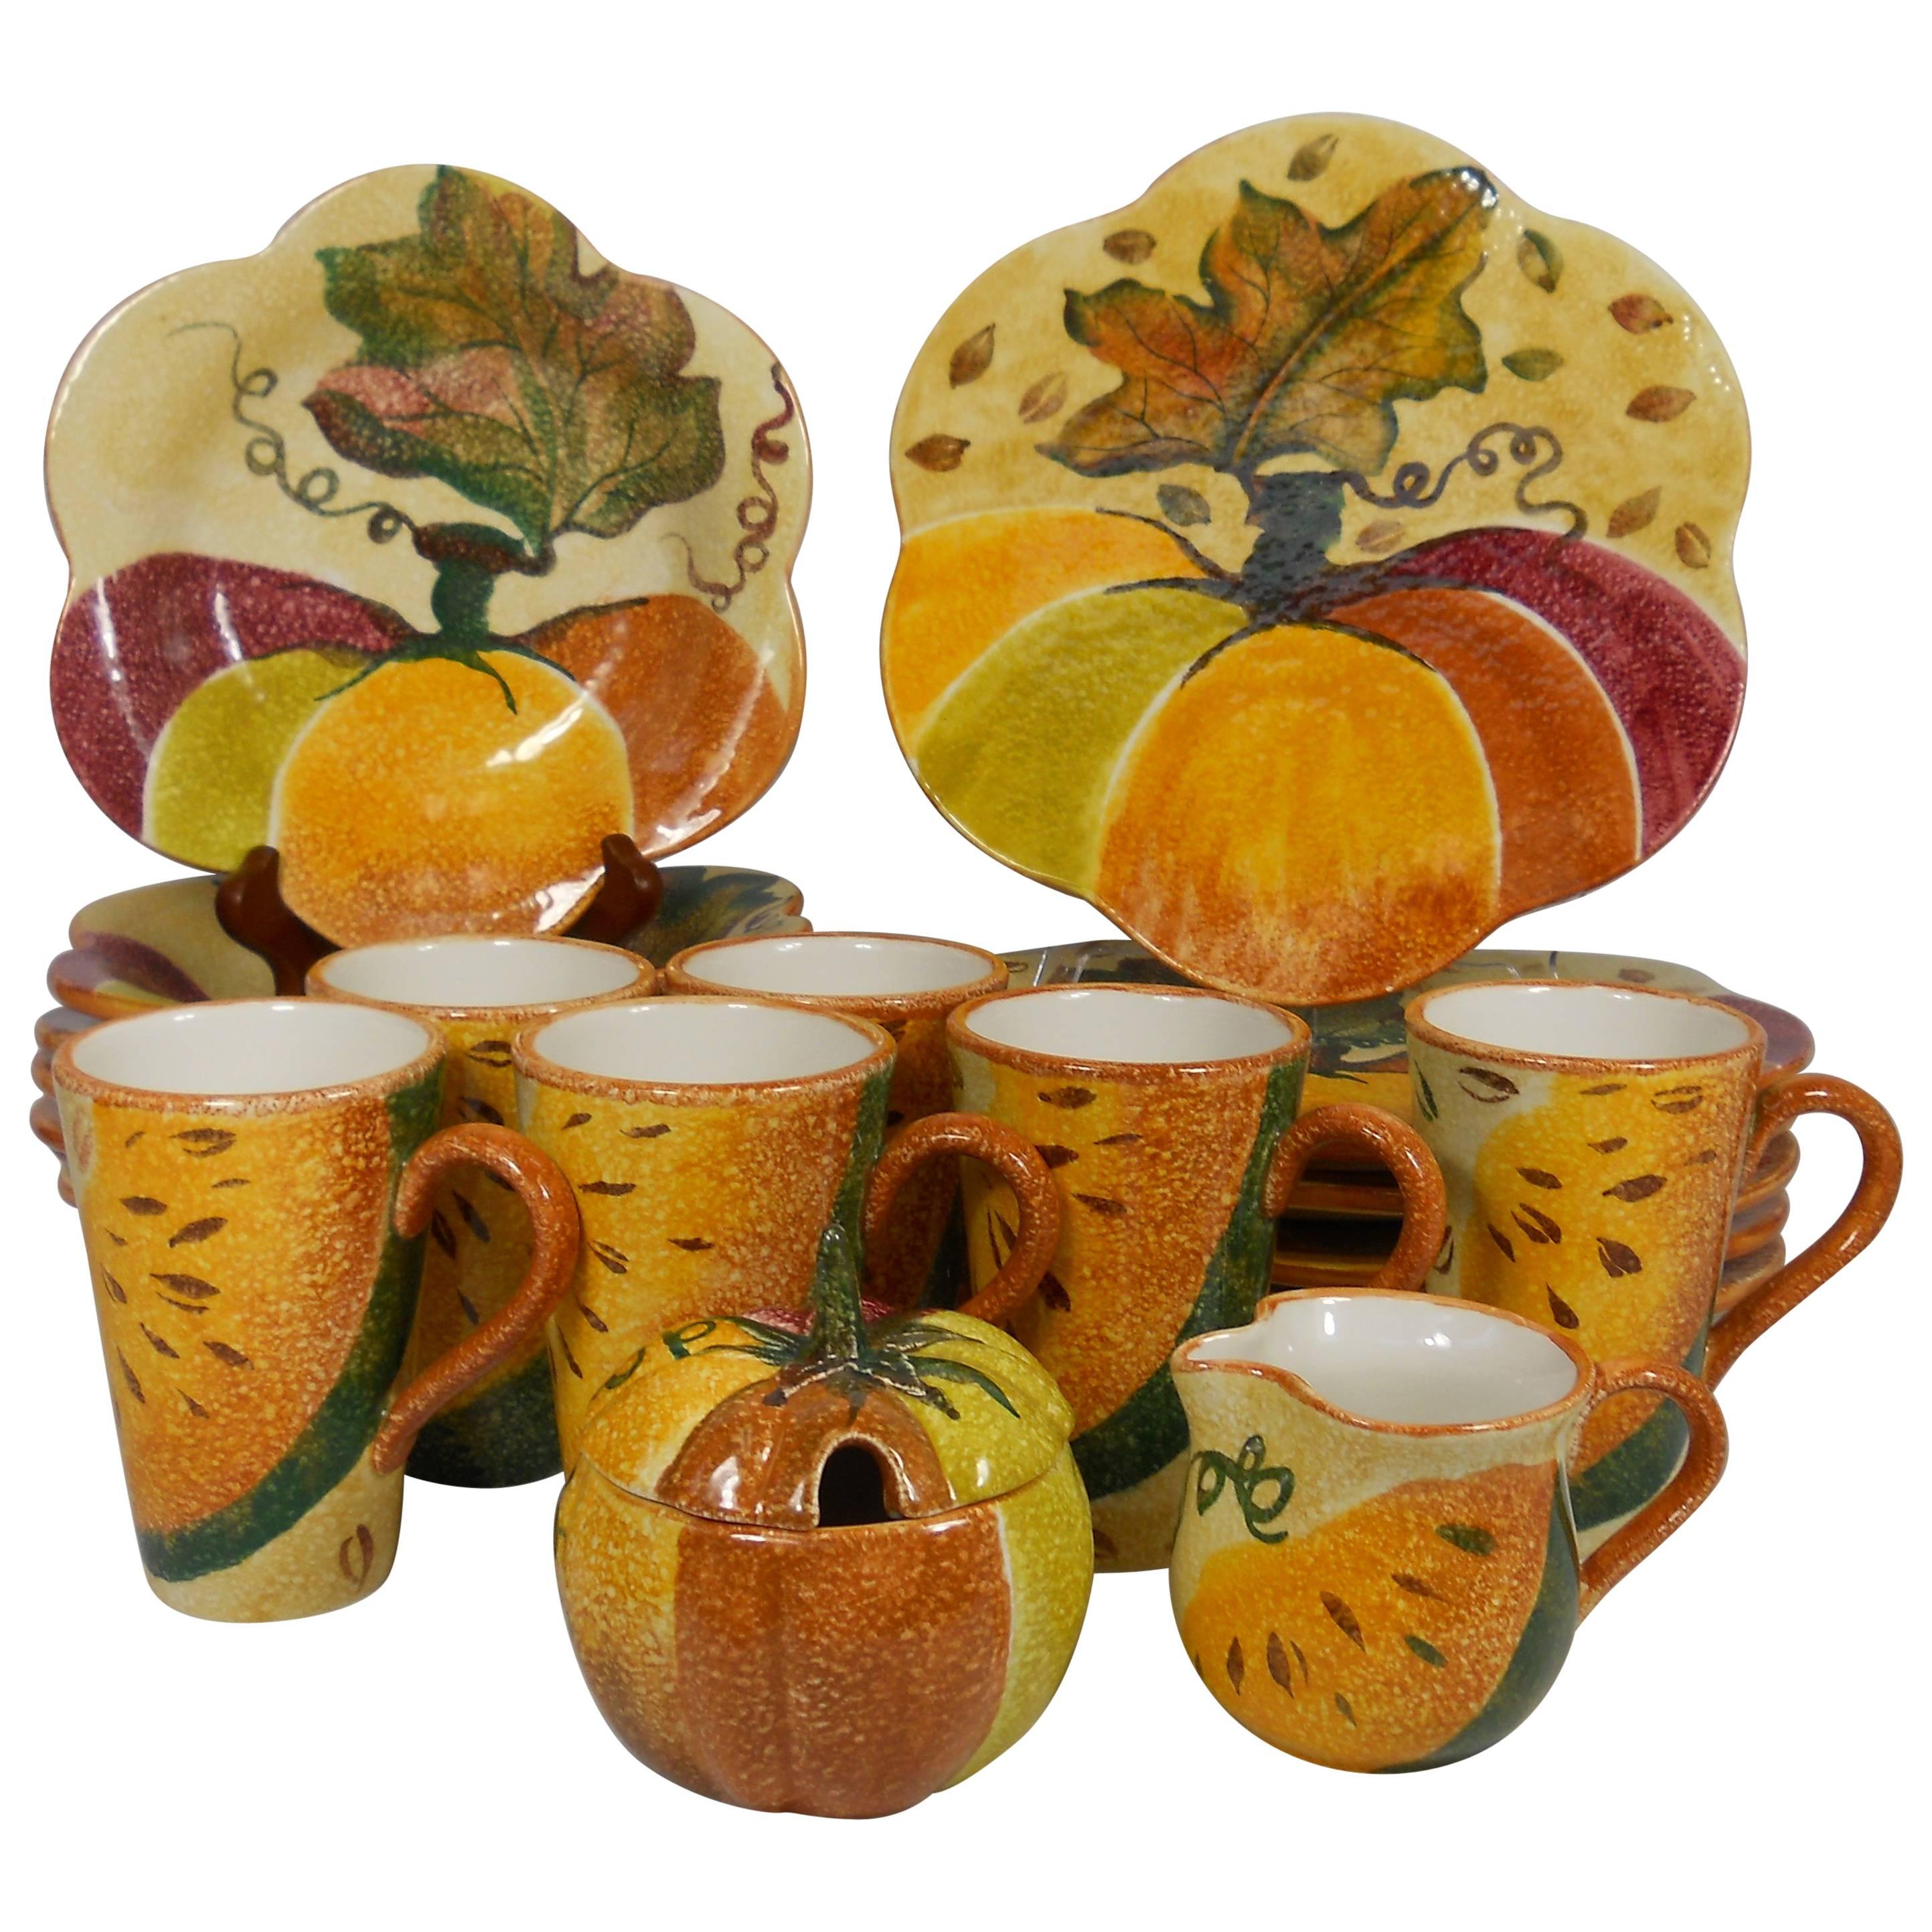 Modigliani Made in Italy "Pumpkin" Pattern Twenty-One-Piece Service for Six For Sale